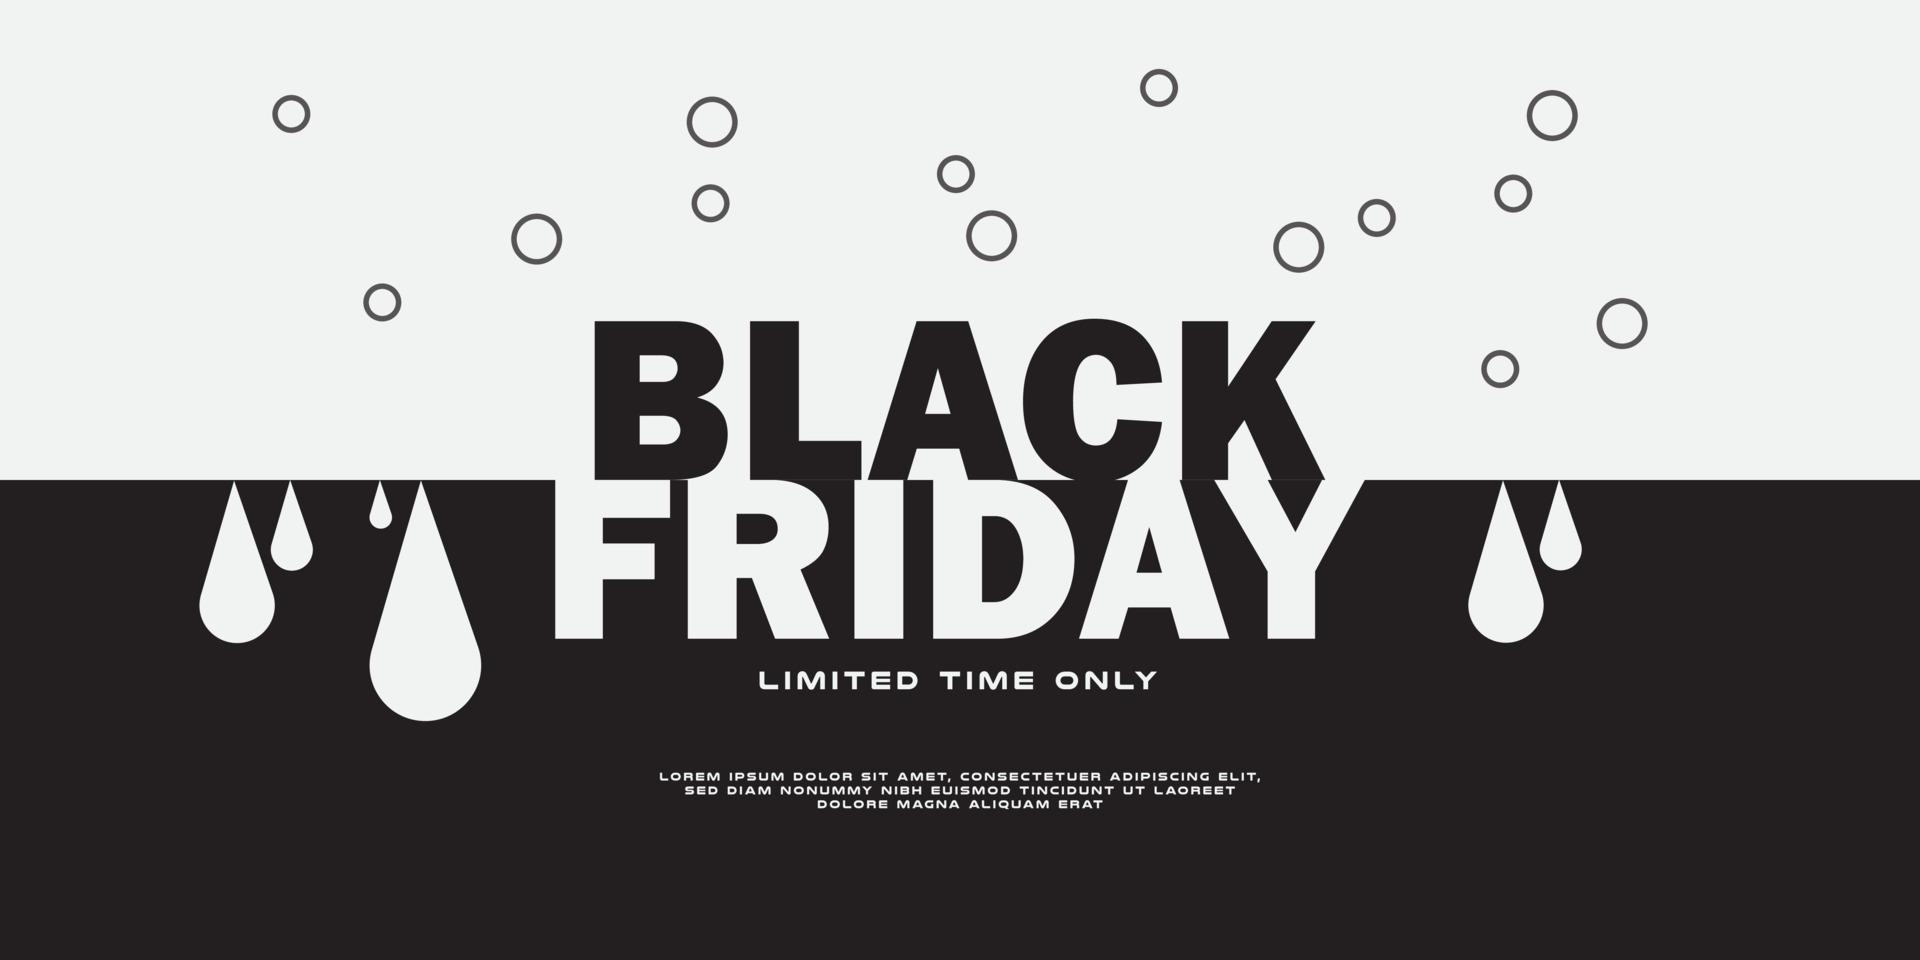 Banners black friday limited time only monochrome style vector